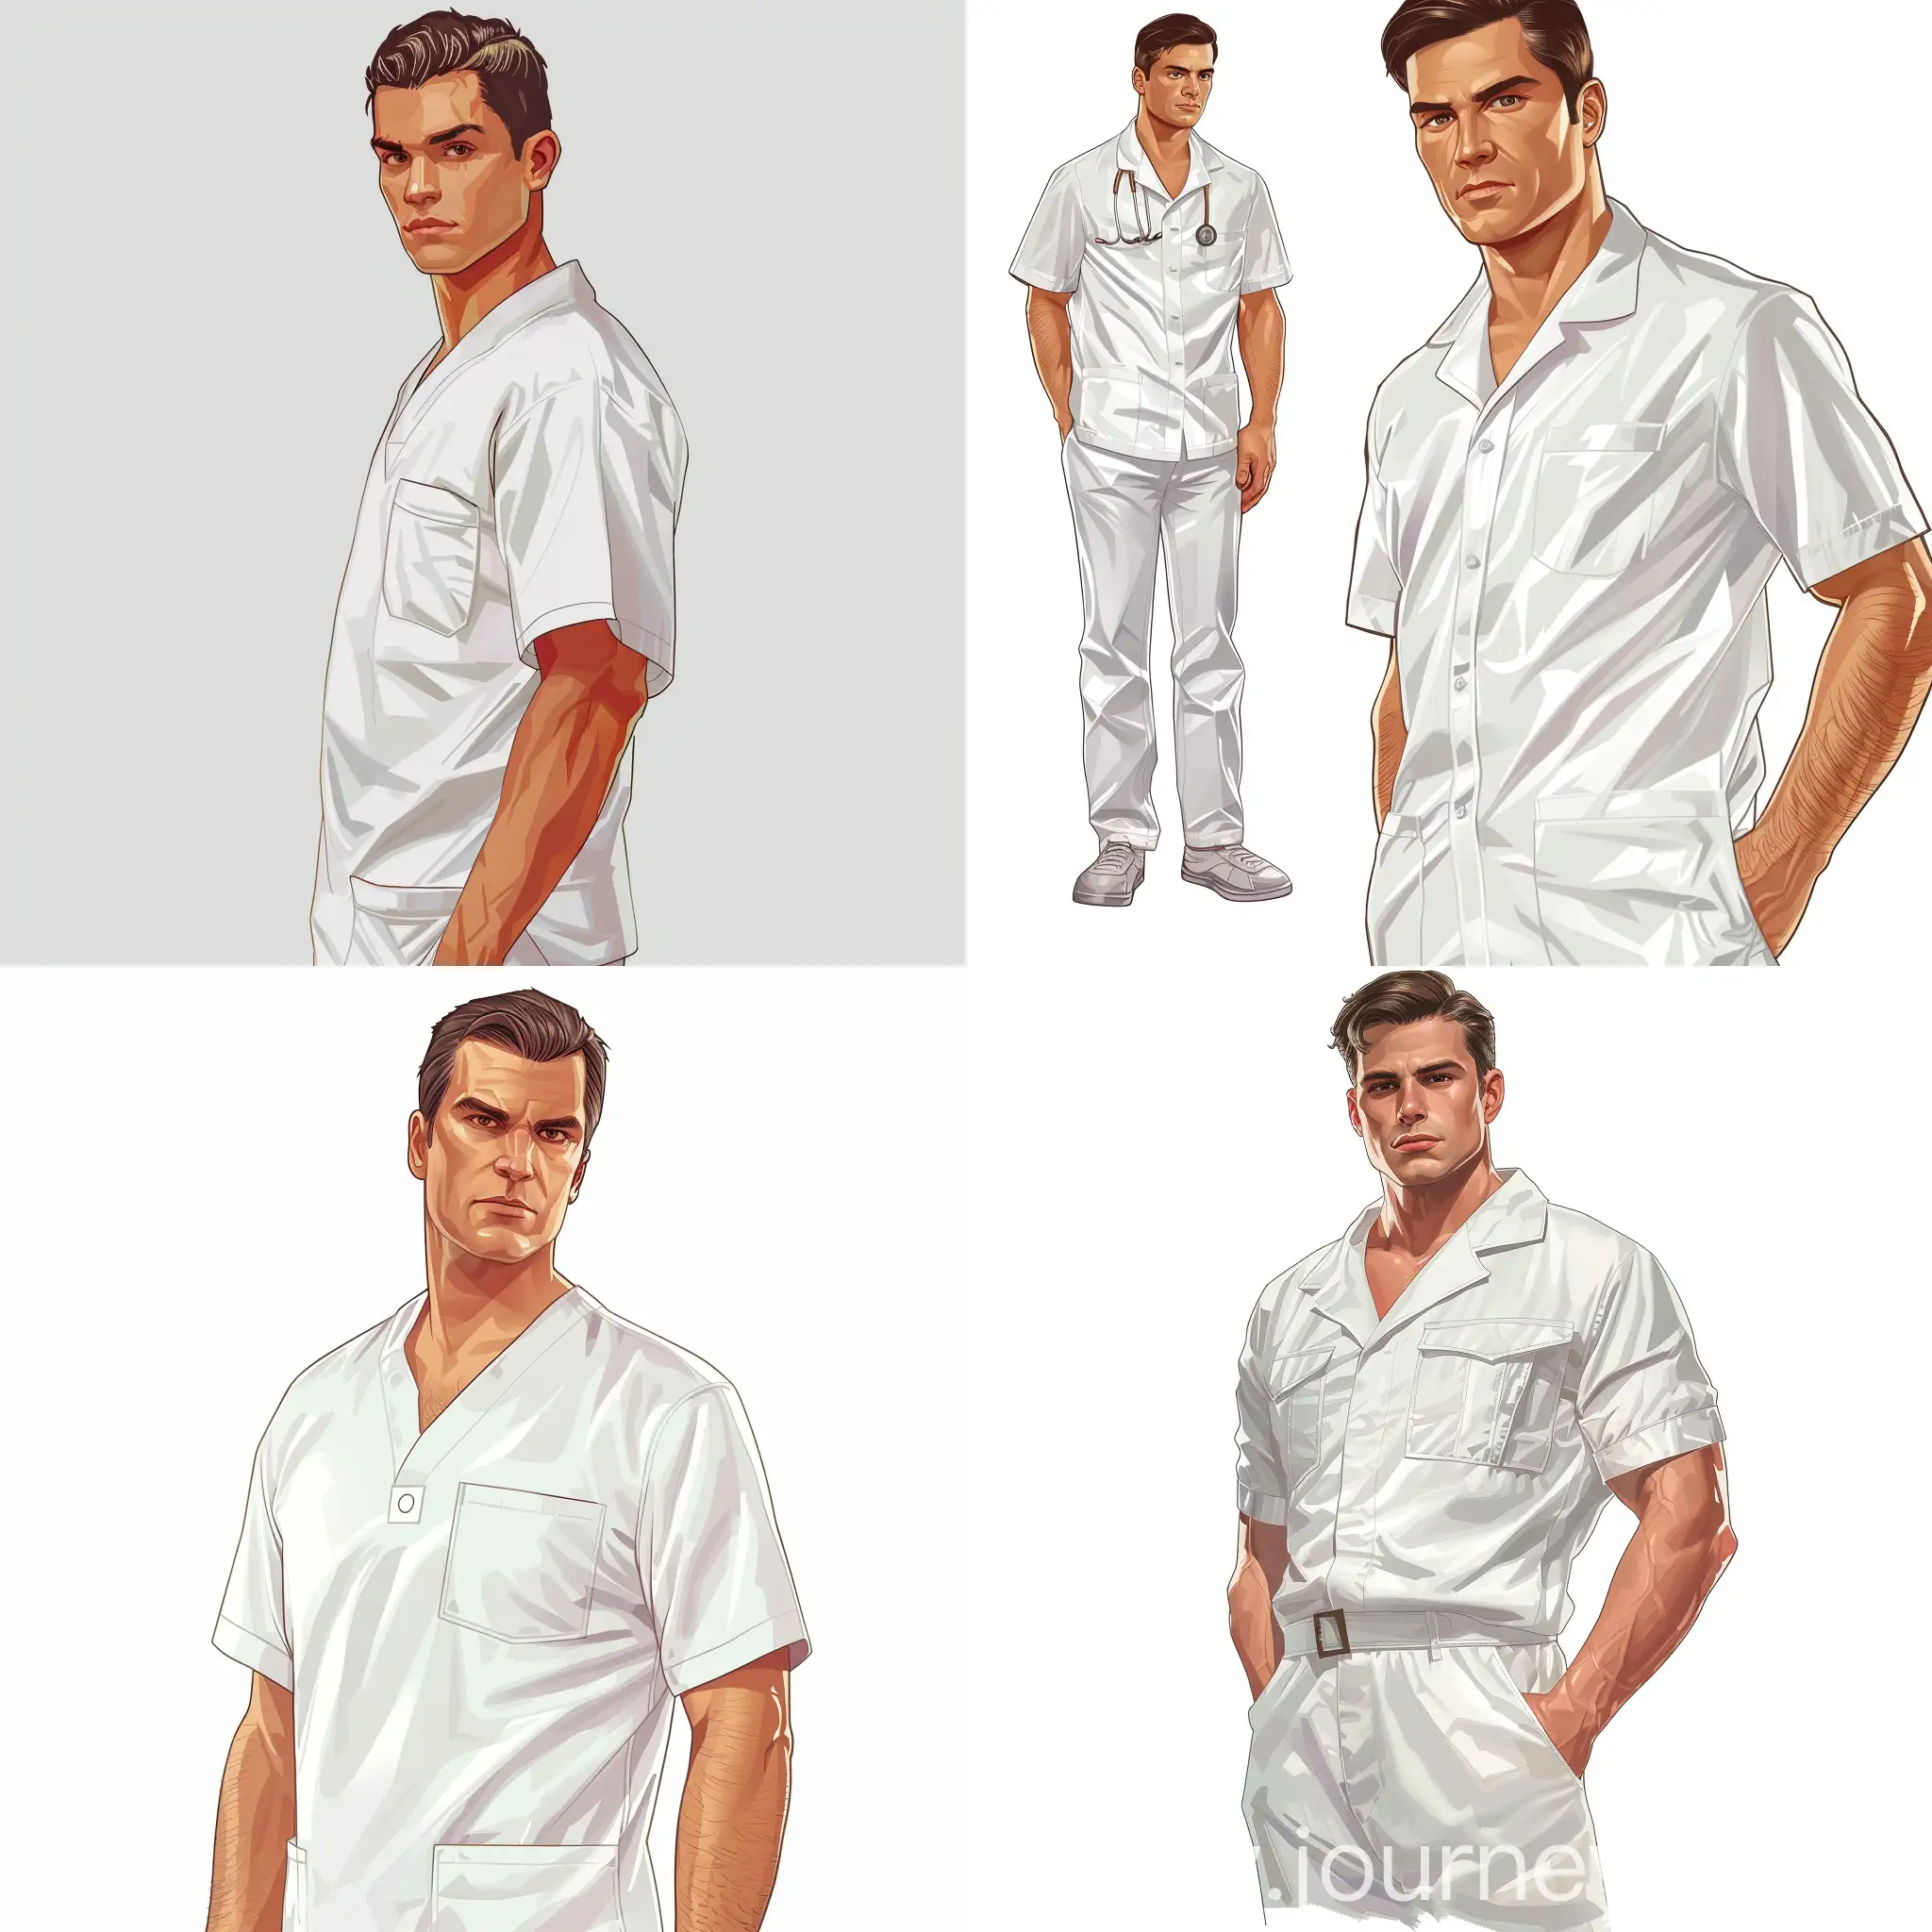 Young-Handsome-Surgeon-in-GTA-5-Style-White-Uniform-Portrait